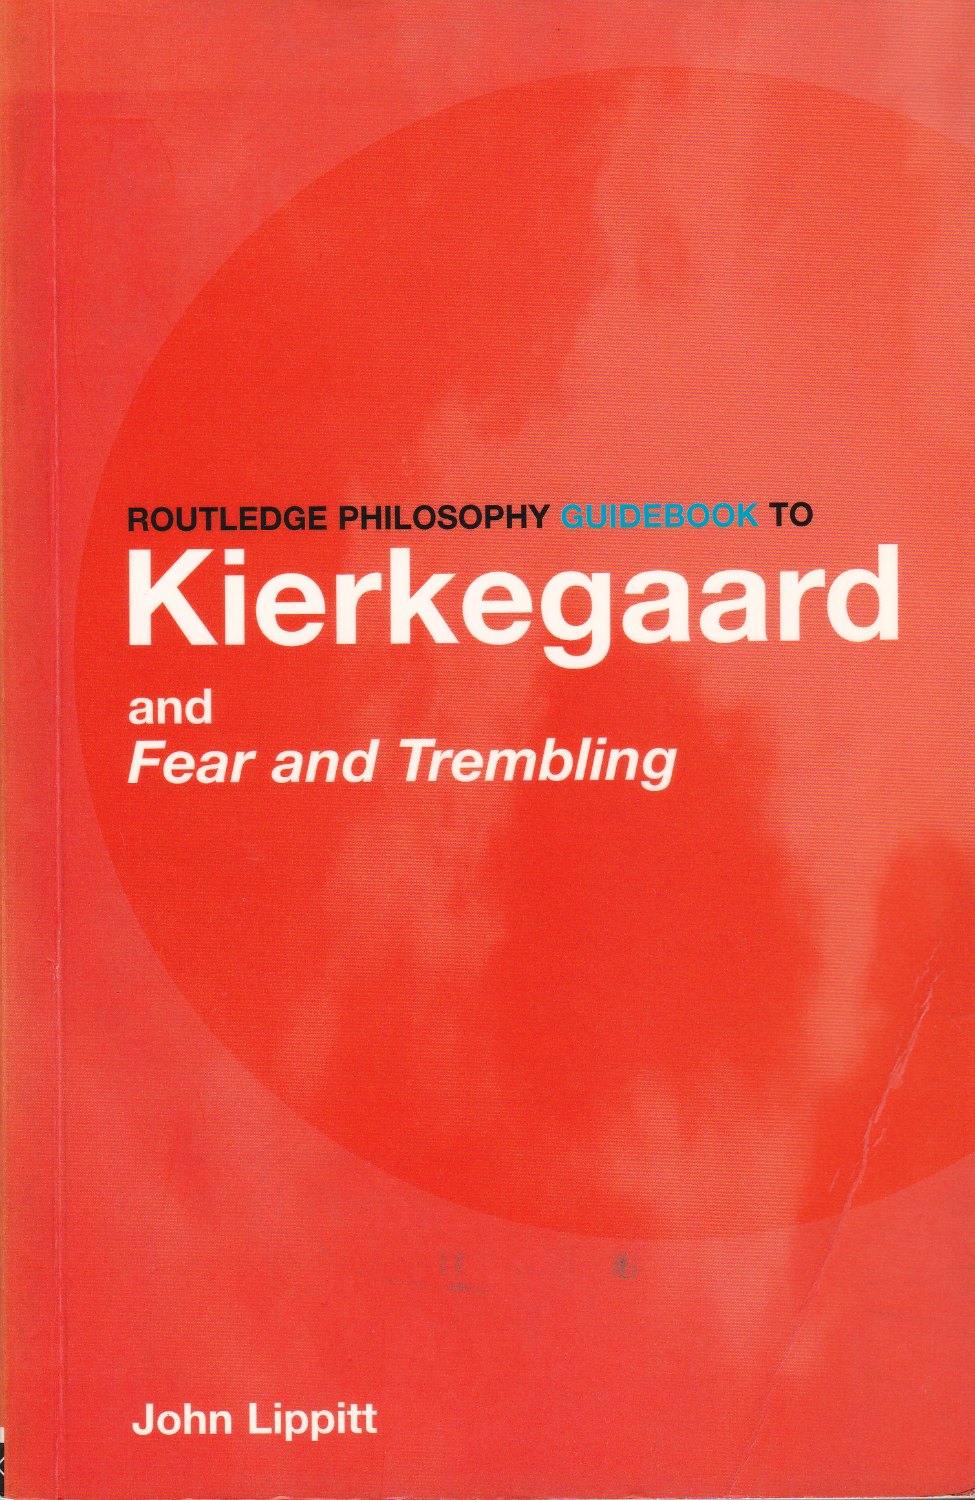 Routledge philosophy guidebook to Kierkegaard and Fear and trembling.